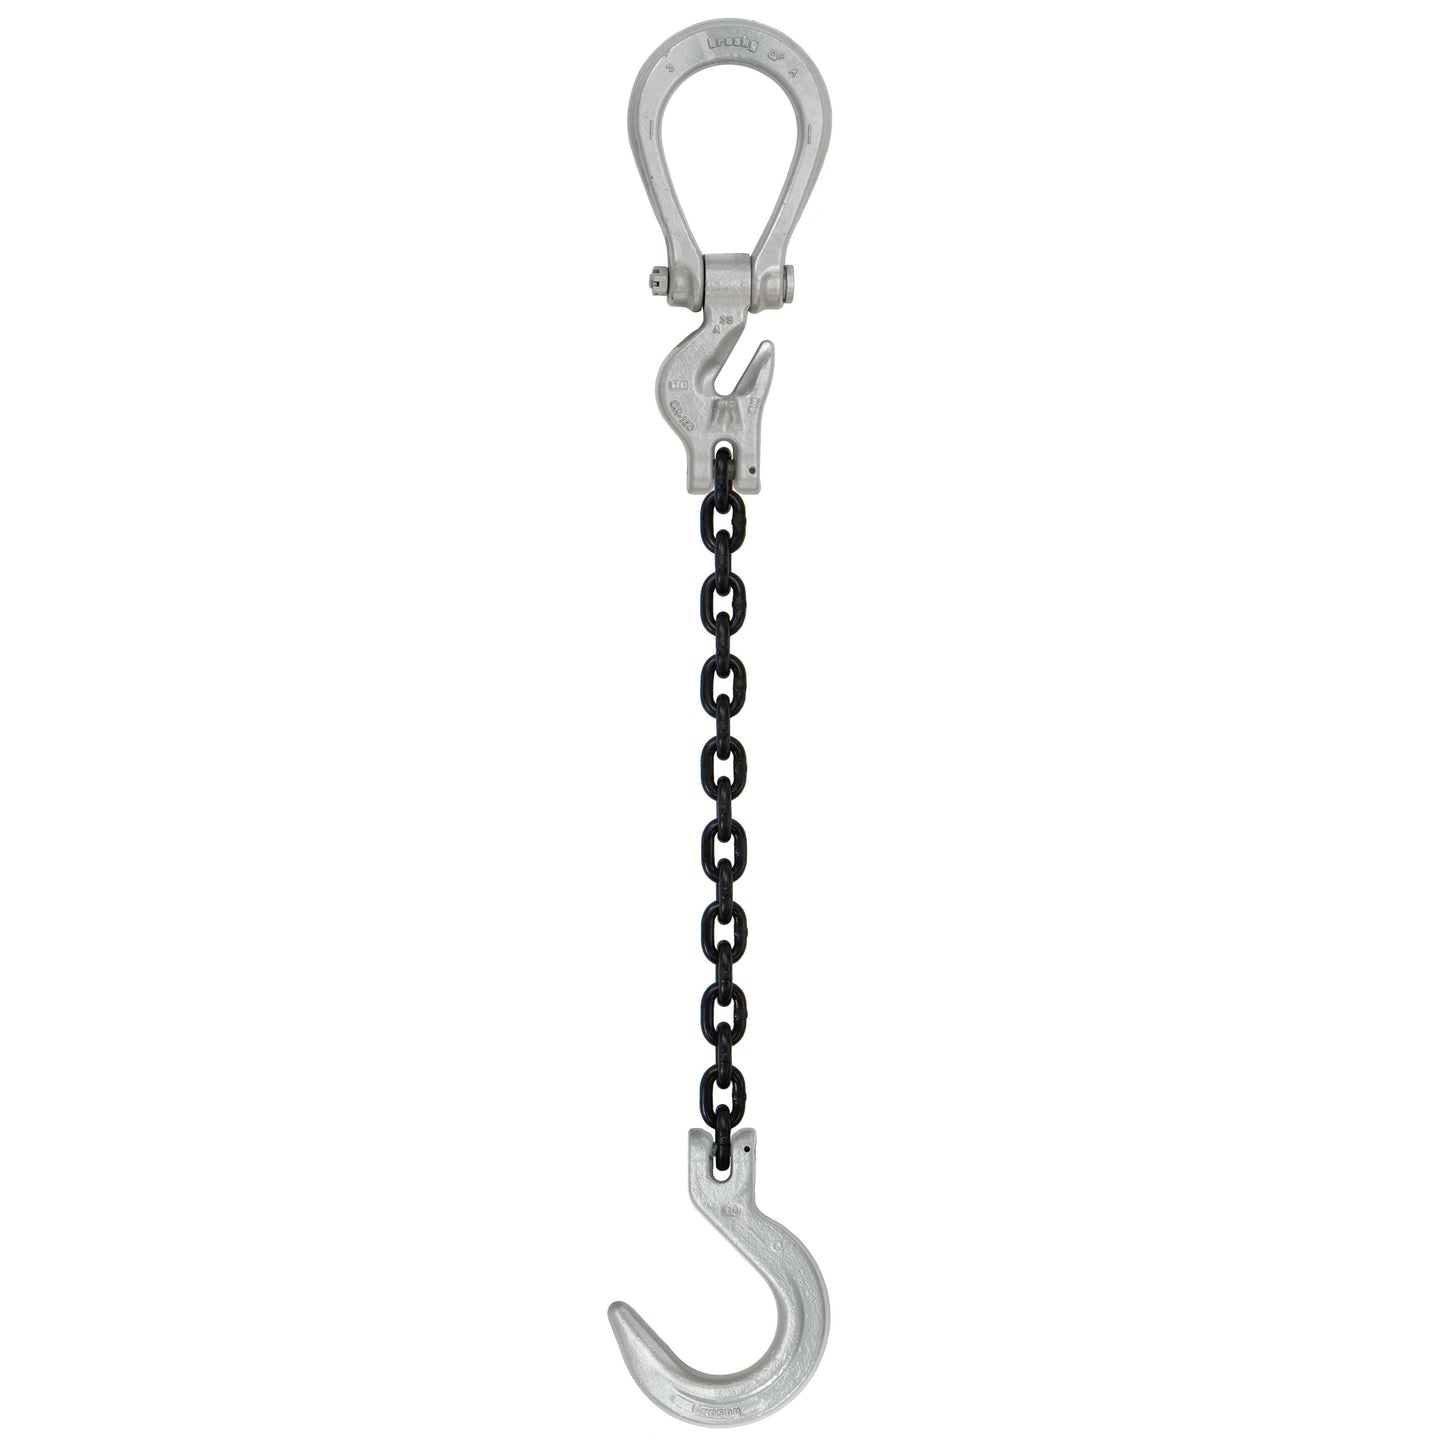 932 inch x 15 foot Domestic Adjustable Single Leg Chain Sling w Crosby Foundry Hook Grade 100 image 1 of 2